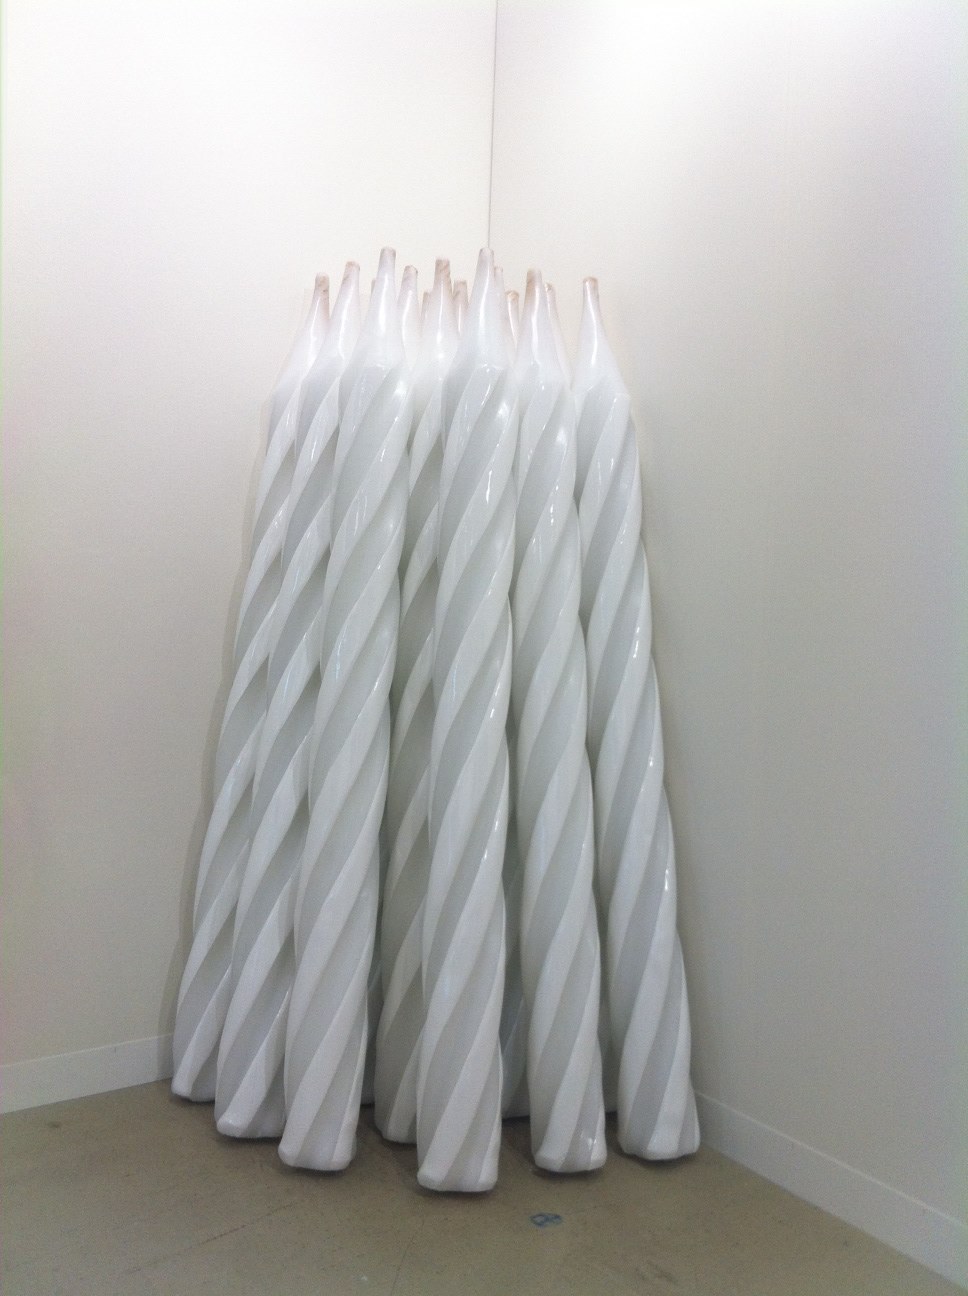 Philippe Parreno, Candles, 2013, 15 white wax candles, 190 cm